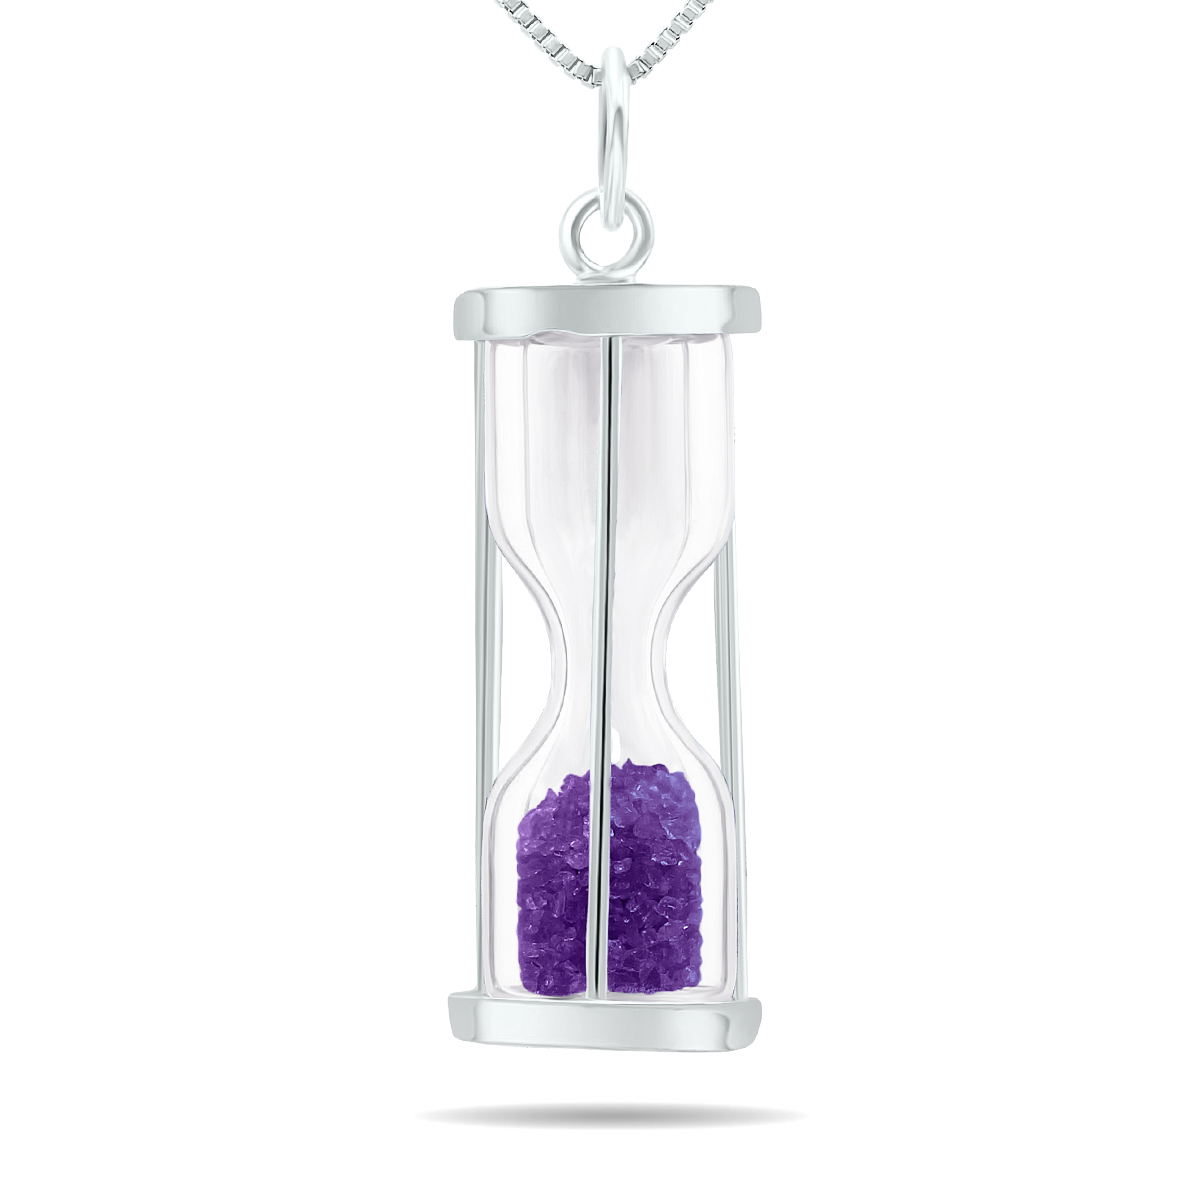 3/4 Carat TW Genuine February Amethyst birthstone Hourglass Pendant Necklace - Tooth Fairy Pixie Dust Gift 925 Sterling Silver